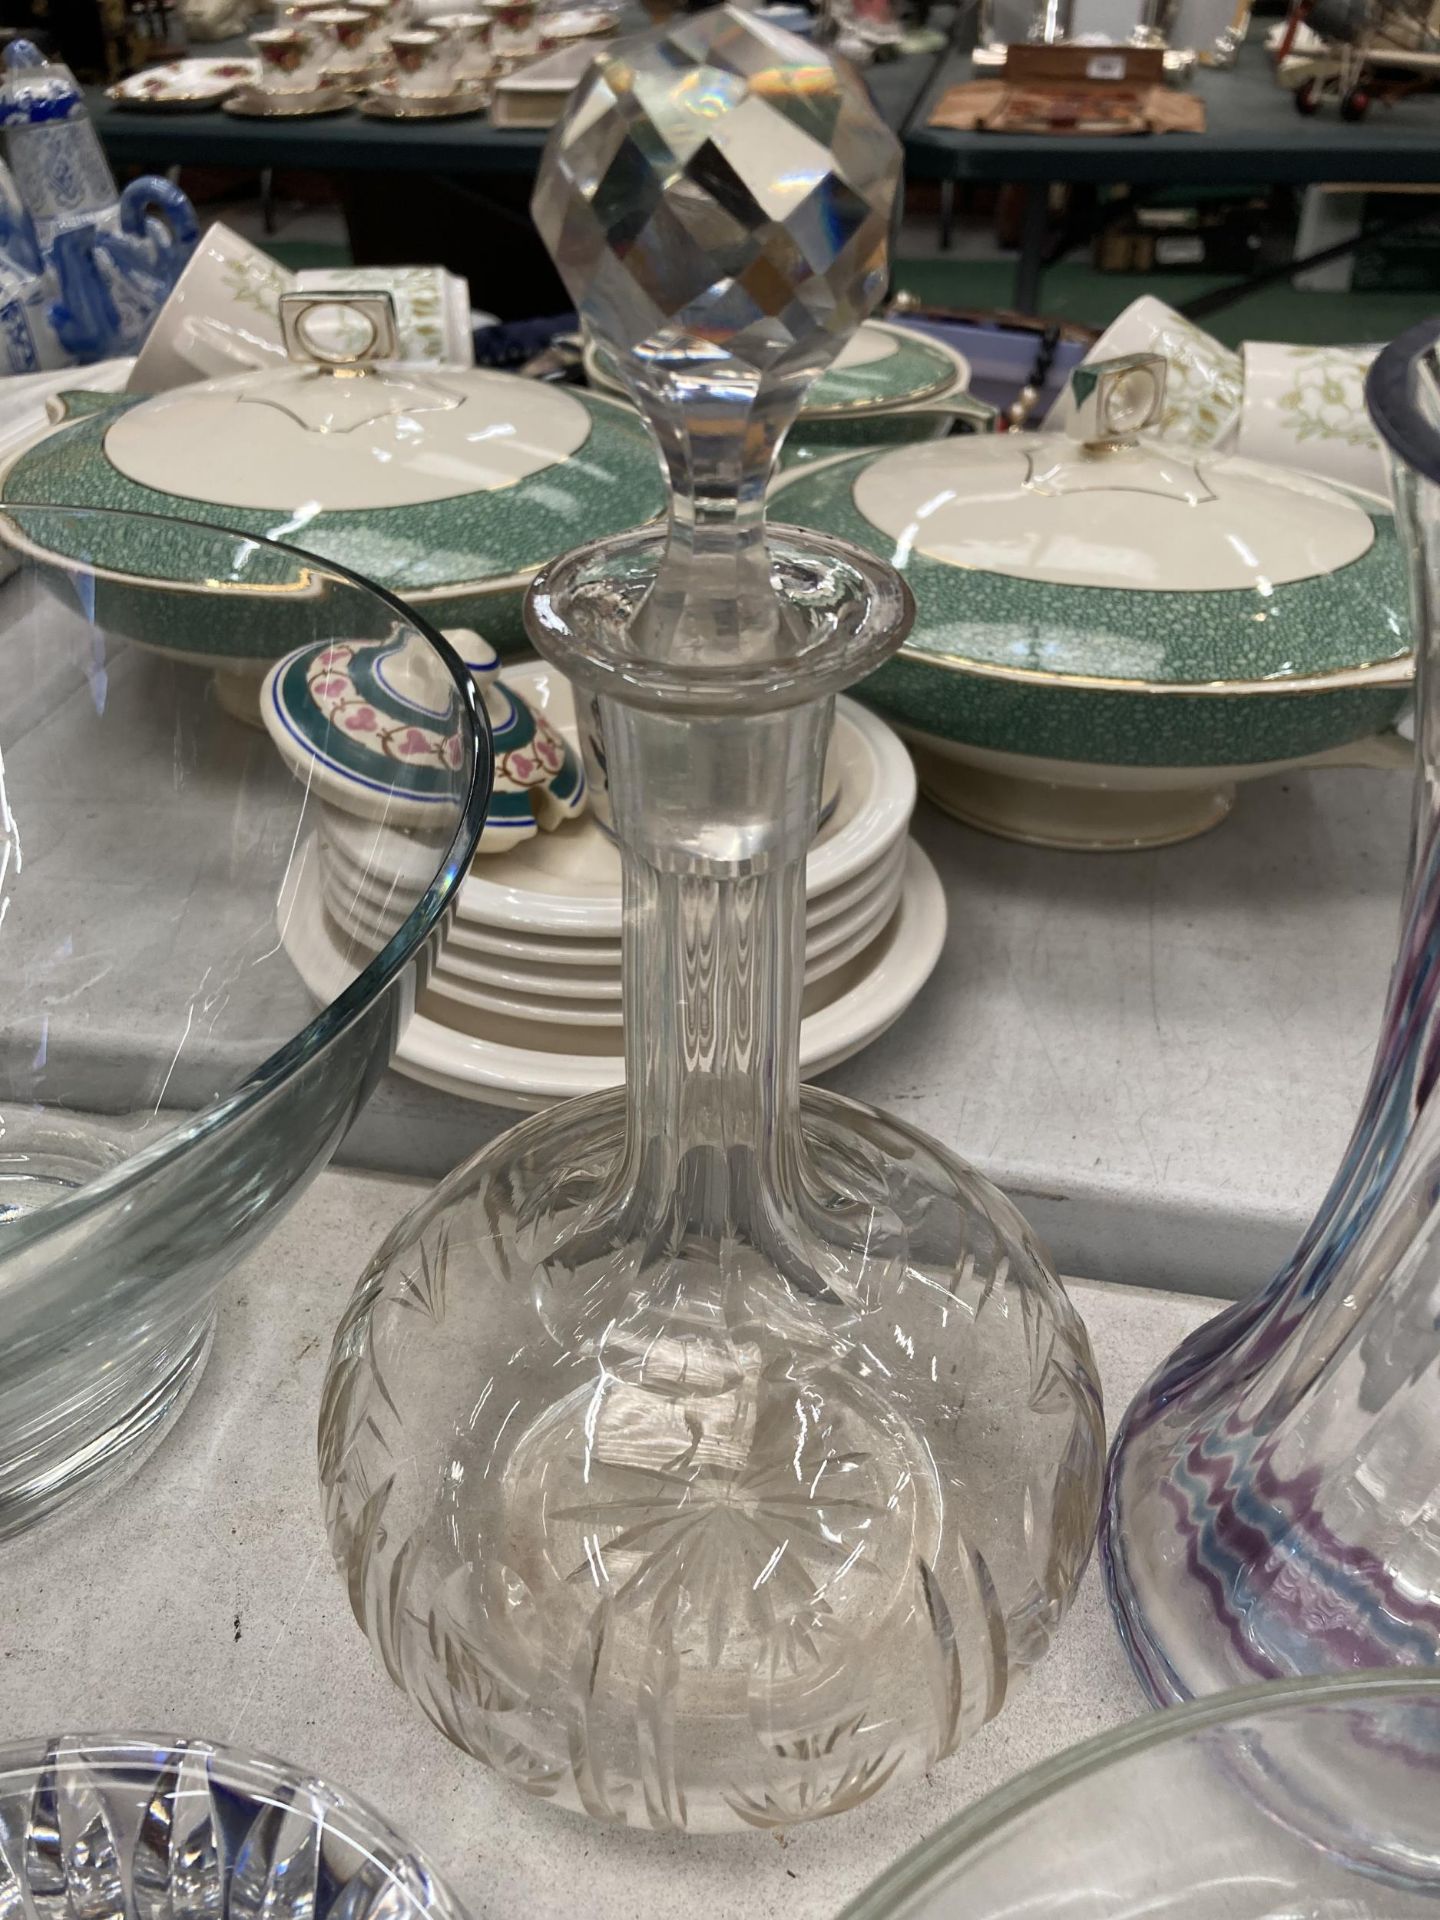 A LARGE QUANTITY OF GLASSWARE TO INCLUDE LARGE BOWLS, DECANTERS, VASES, WINE GLASSES, ETC - Image 3 of 5